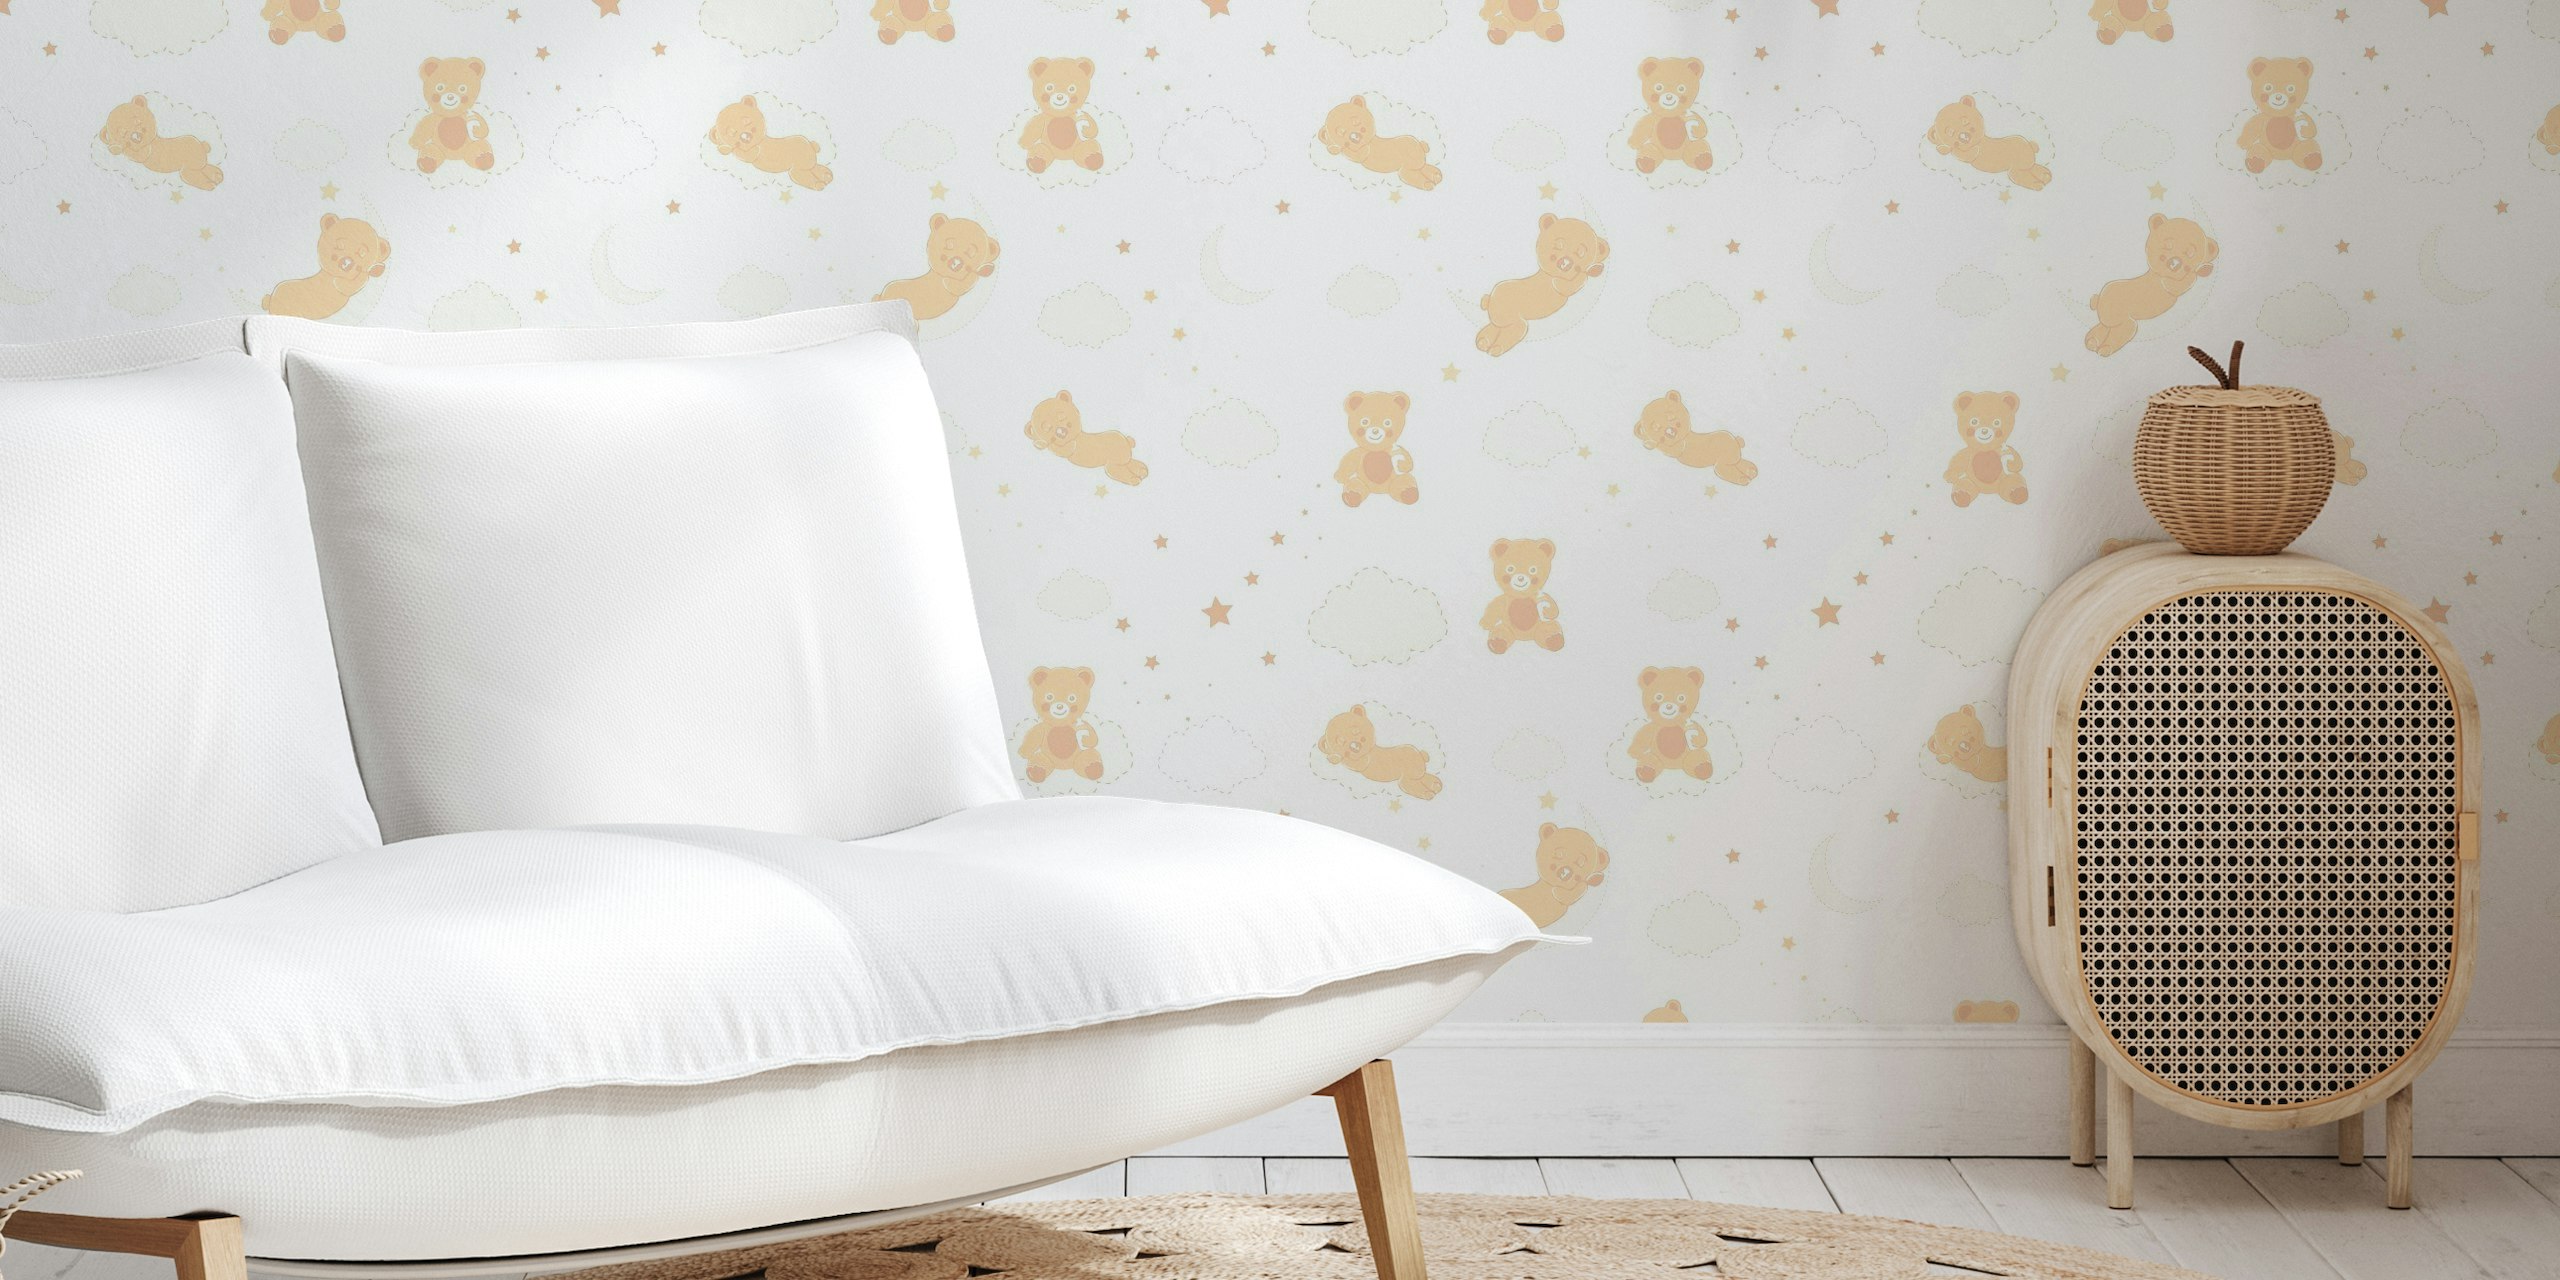 Cute teddy bears with clouds neutral pattern wallpaper